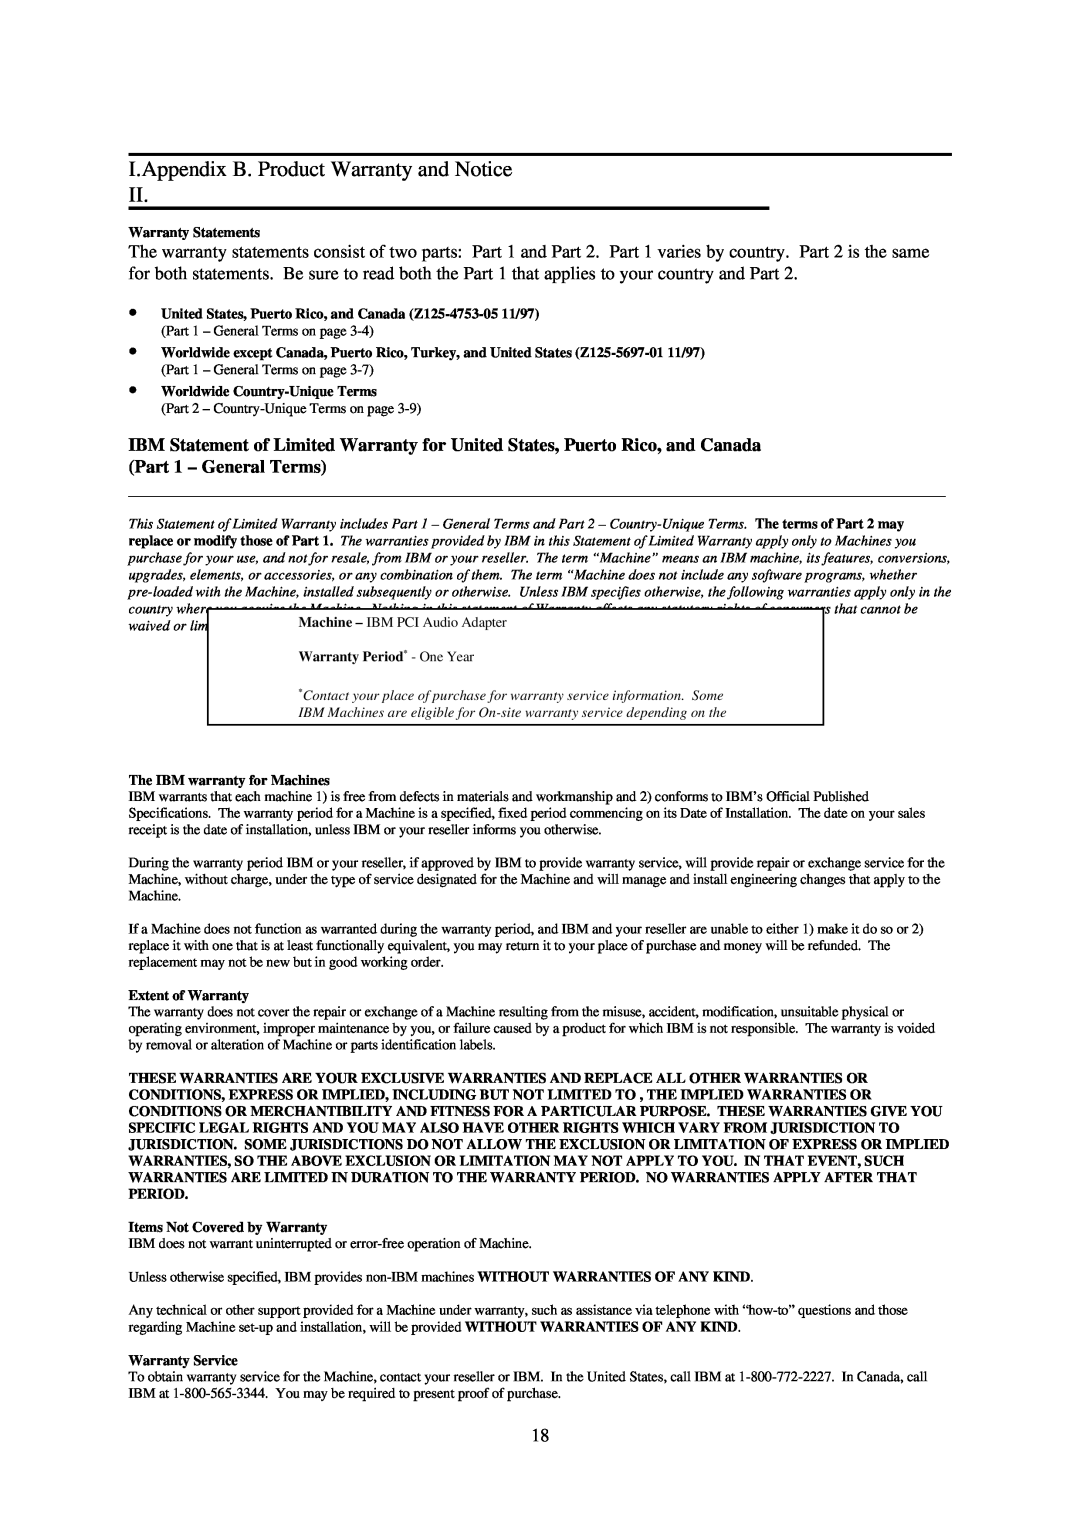 IBM L70 manual I.Appendix B. Product Warranty and Notice II, Warranty Statements, ∙ Worldwide Country-Unique Terms 